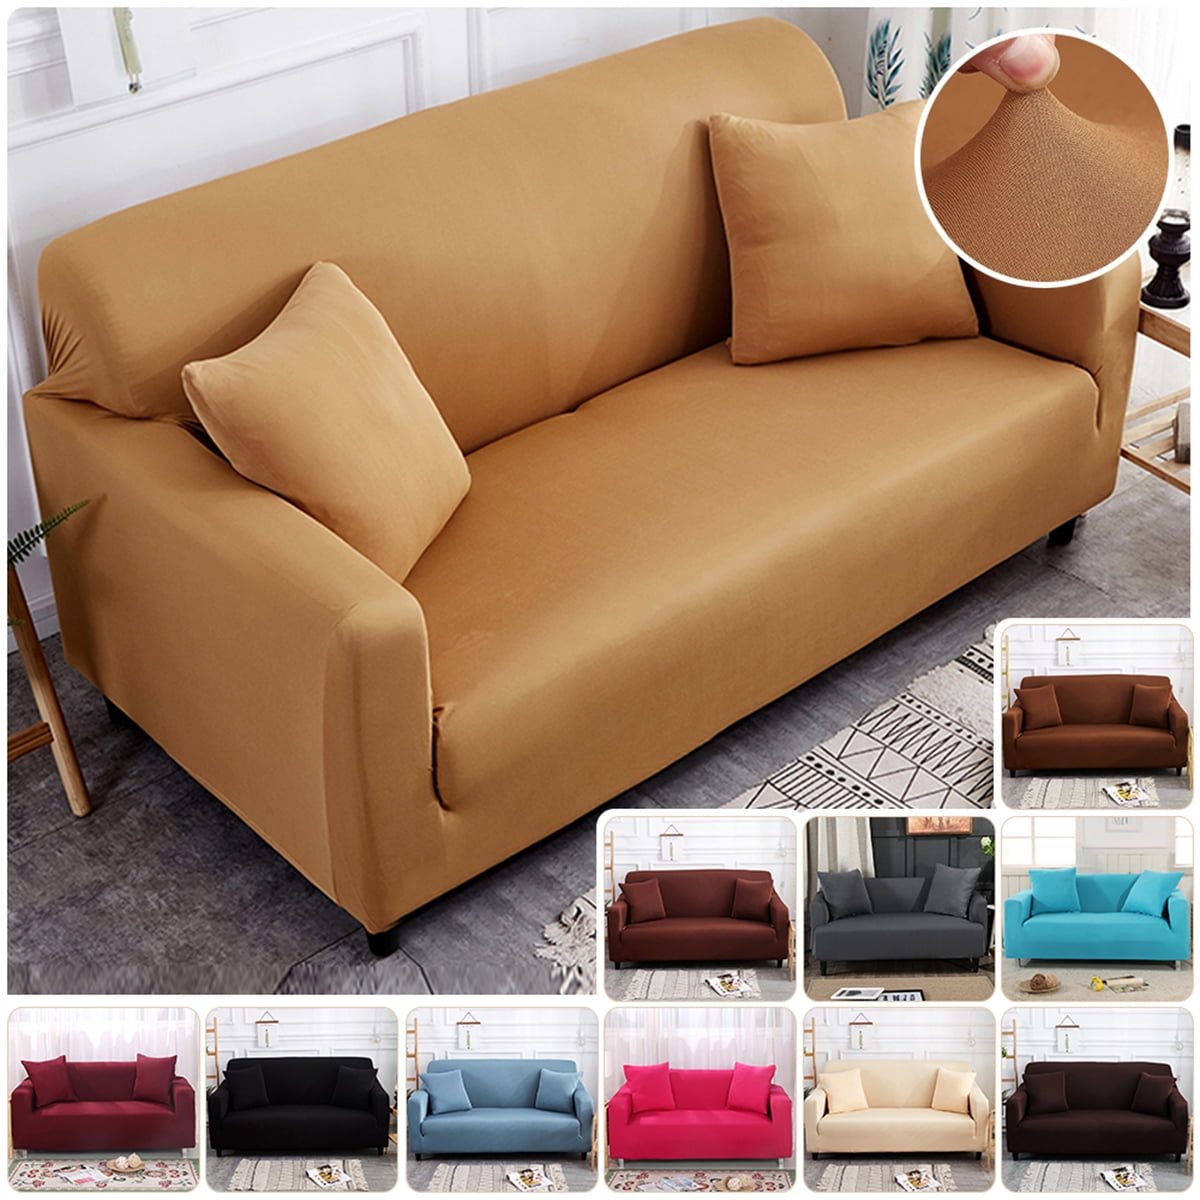 Details about   1/2/3/4 Seater Elastic Sofa Cover Slipcover Settee Stretch Solid Couch Protector 